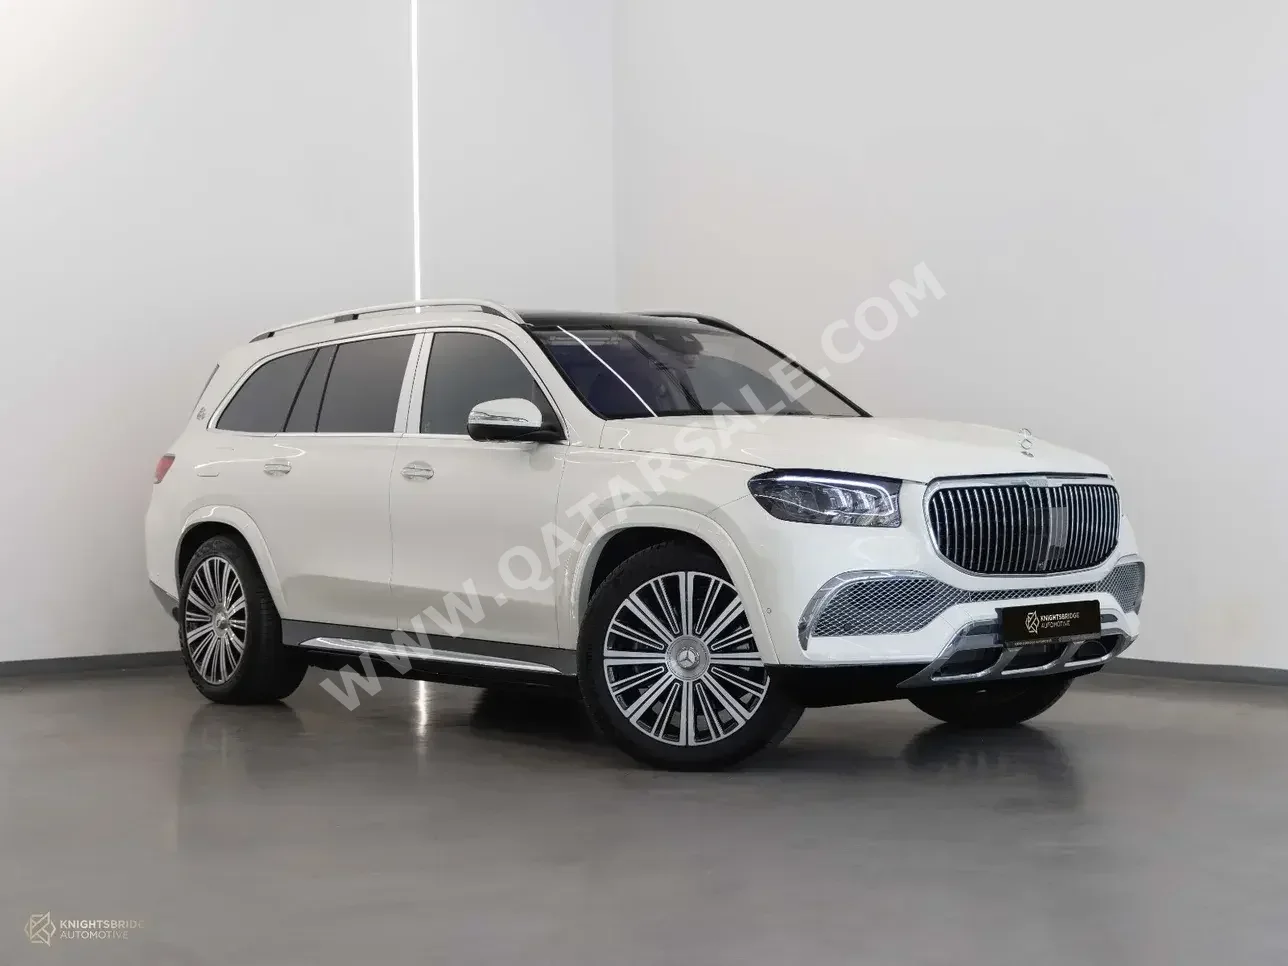 Mercedes-Benz  GLS  600 Maybach  2023  Automatic  3,000 Km  8 Cylinder  Four Wheel Drive (4WD)  SUV  White  With Warranty